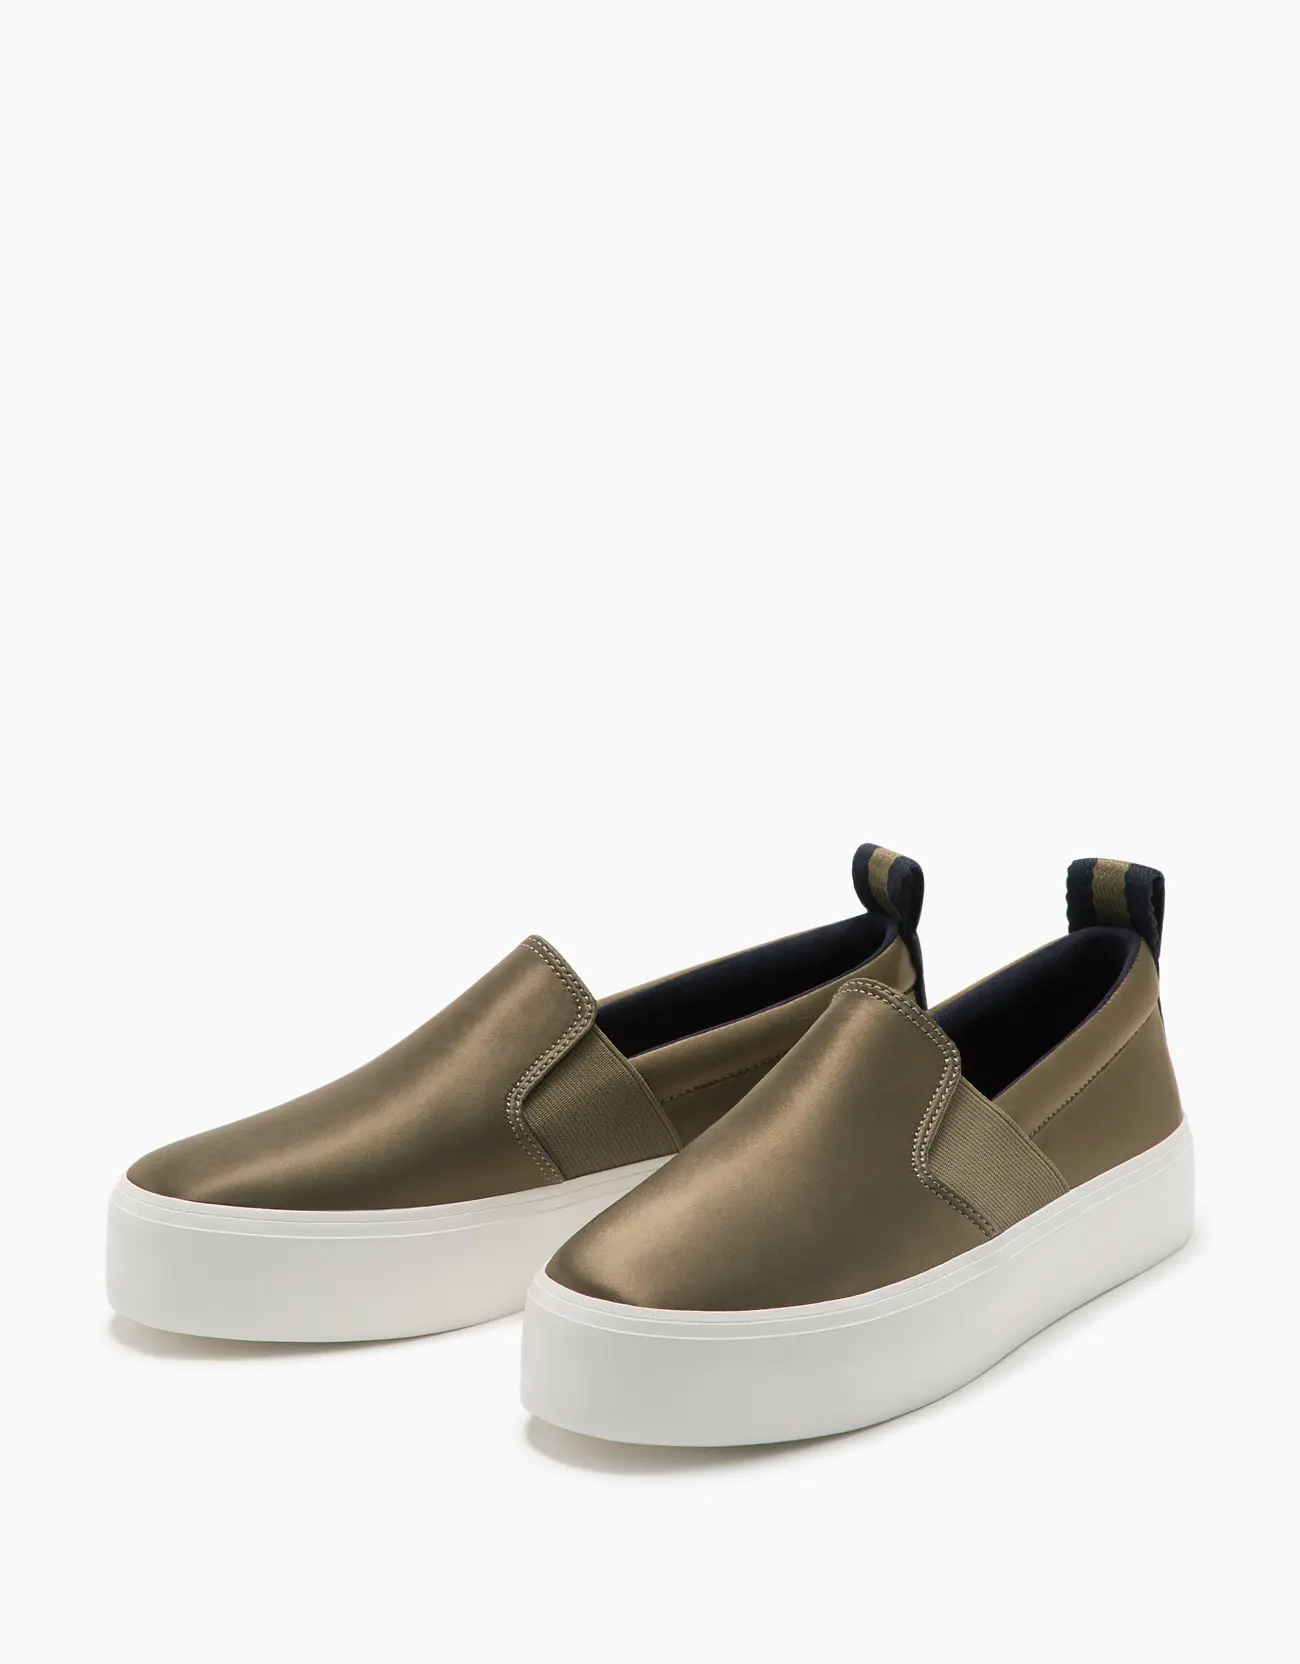 Satin sneakers with gems and elastic tabs and no laces Rp. 399.900 (Image: bershka.com)